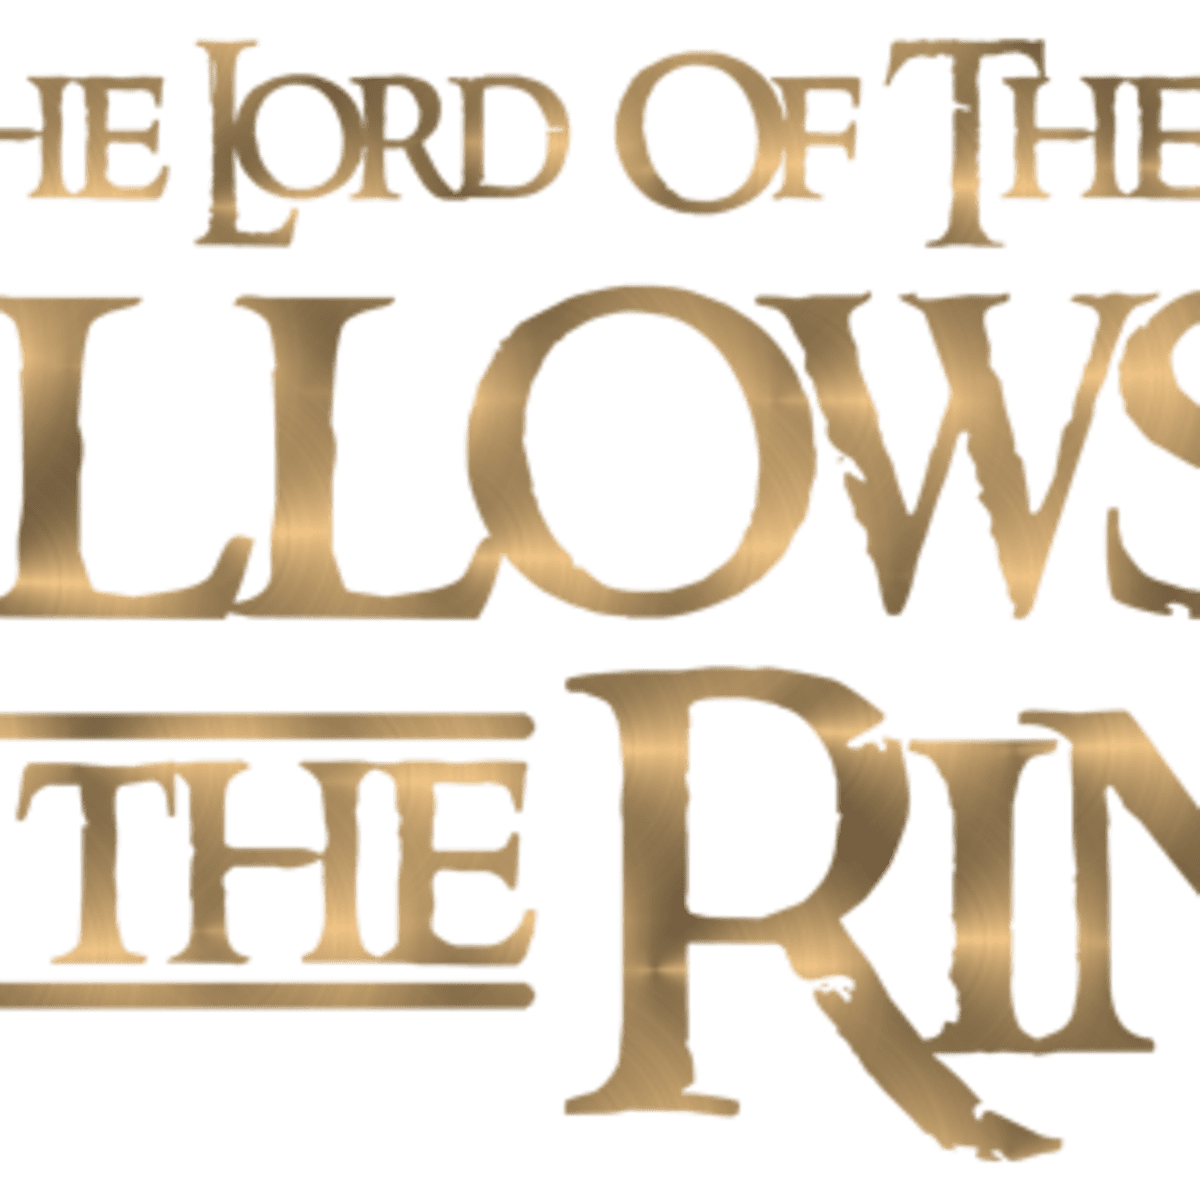 Comparing Every Version of Lord of the Rings: The Fellowship of